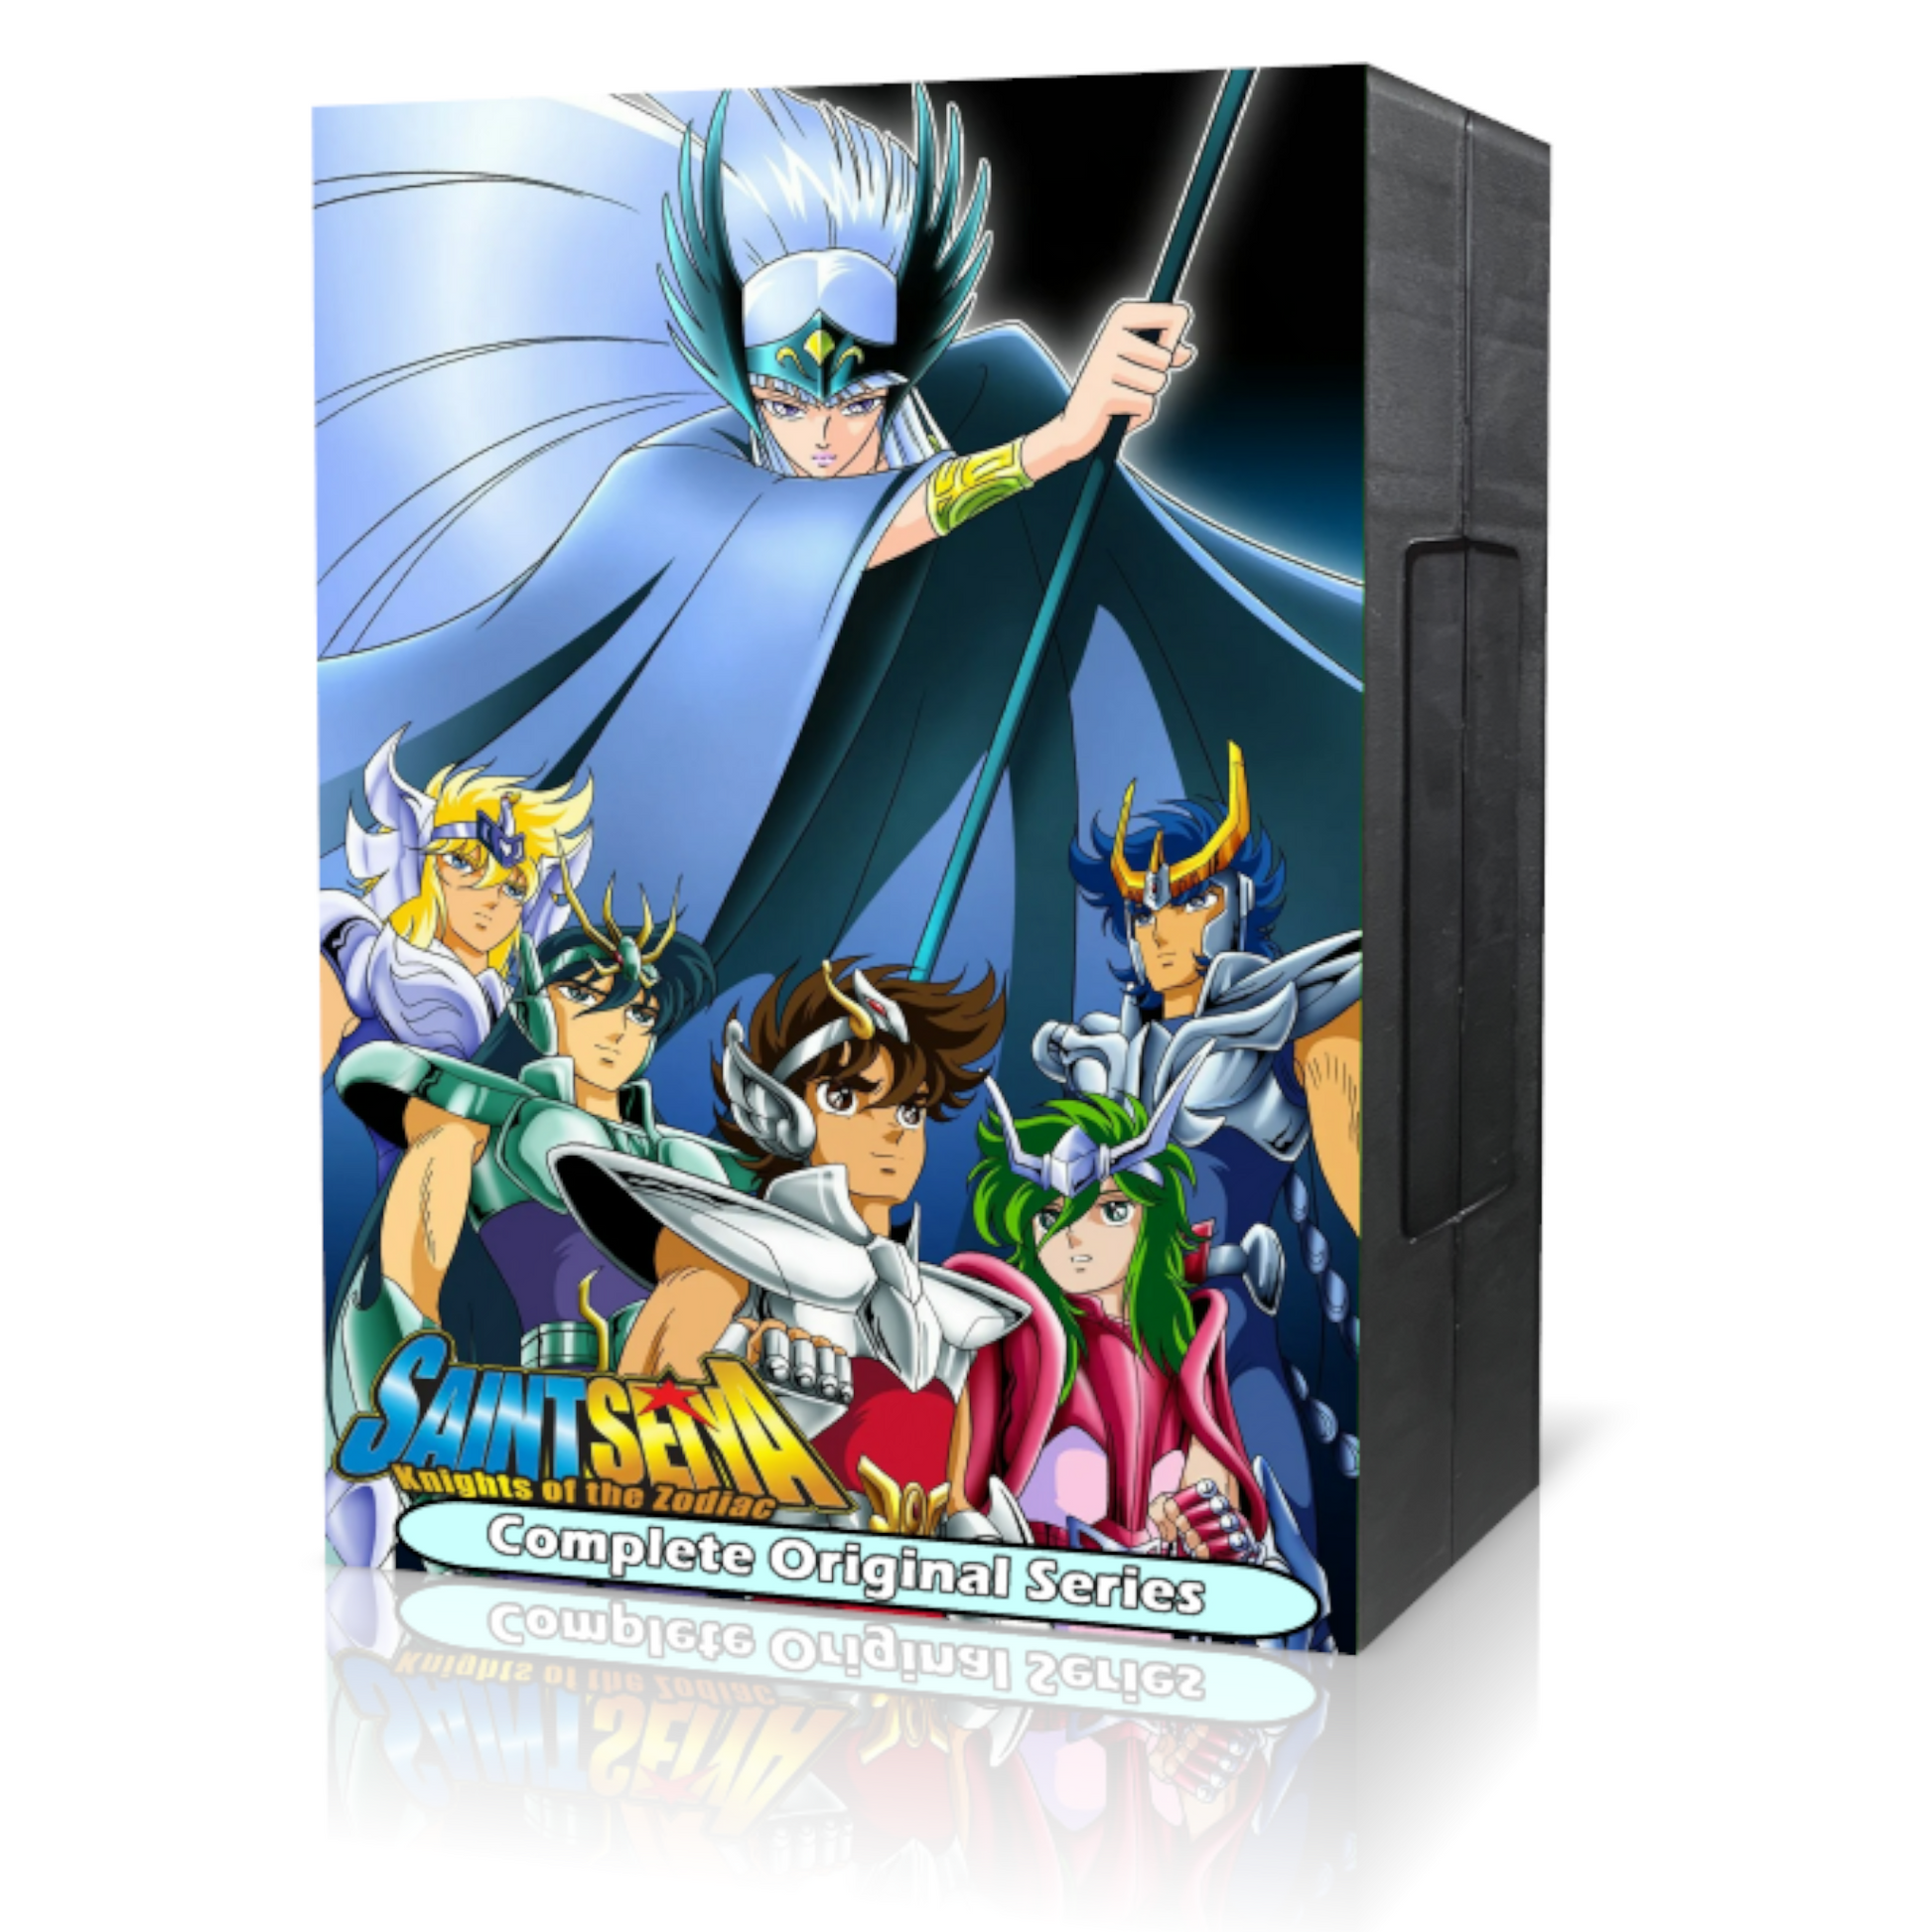 The Legend of the Legendary Heroes Anime + Special Dual Audio  English/Japanese